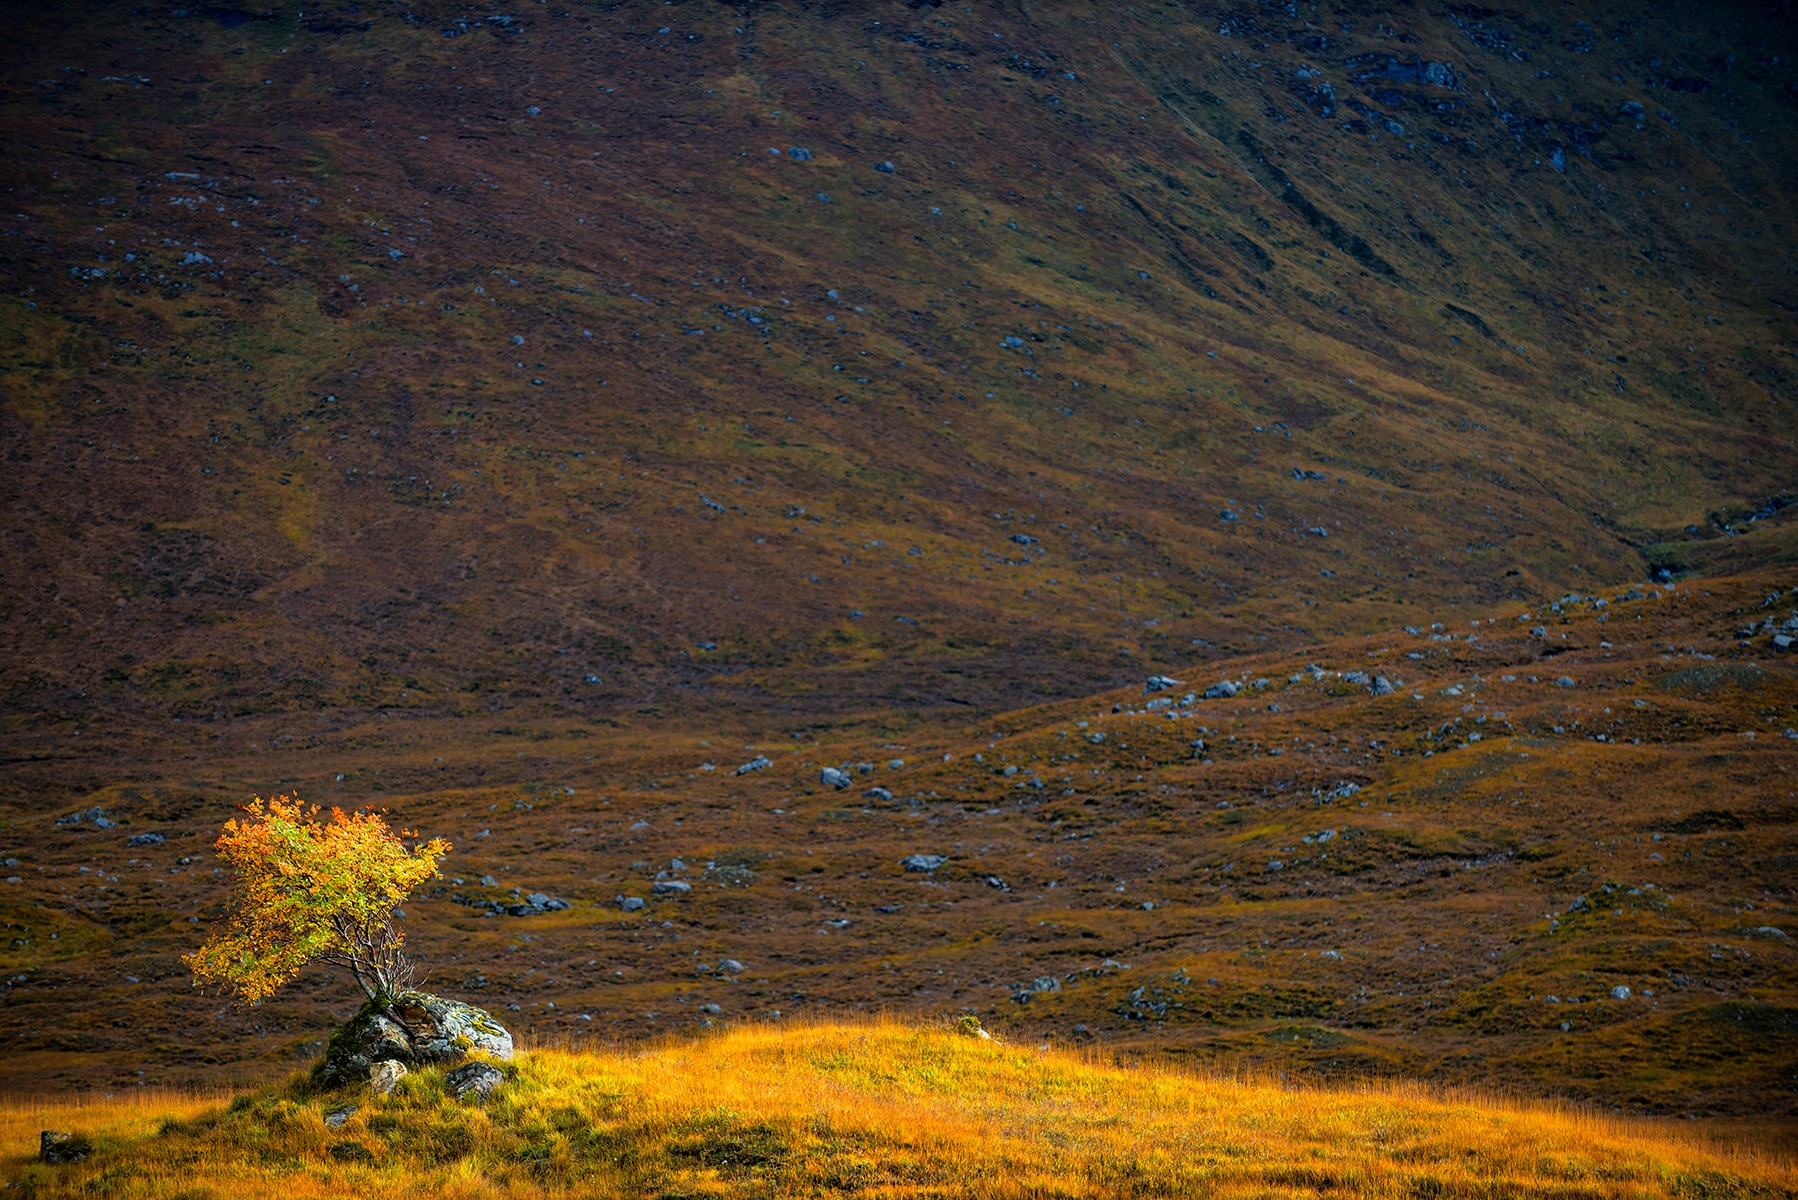 A solitary tree stand alone in Glen Shiel in the Scottish Highlands.